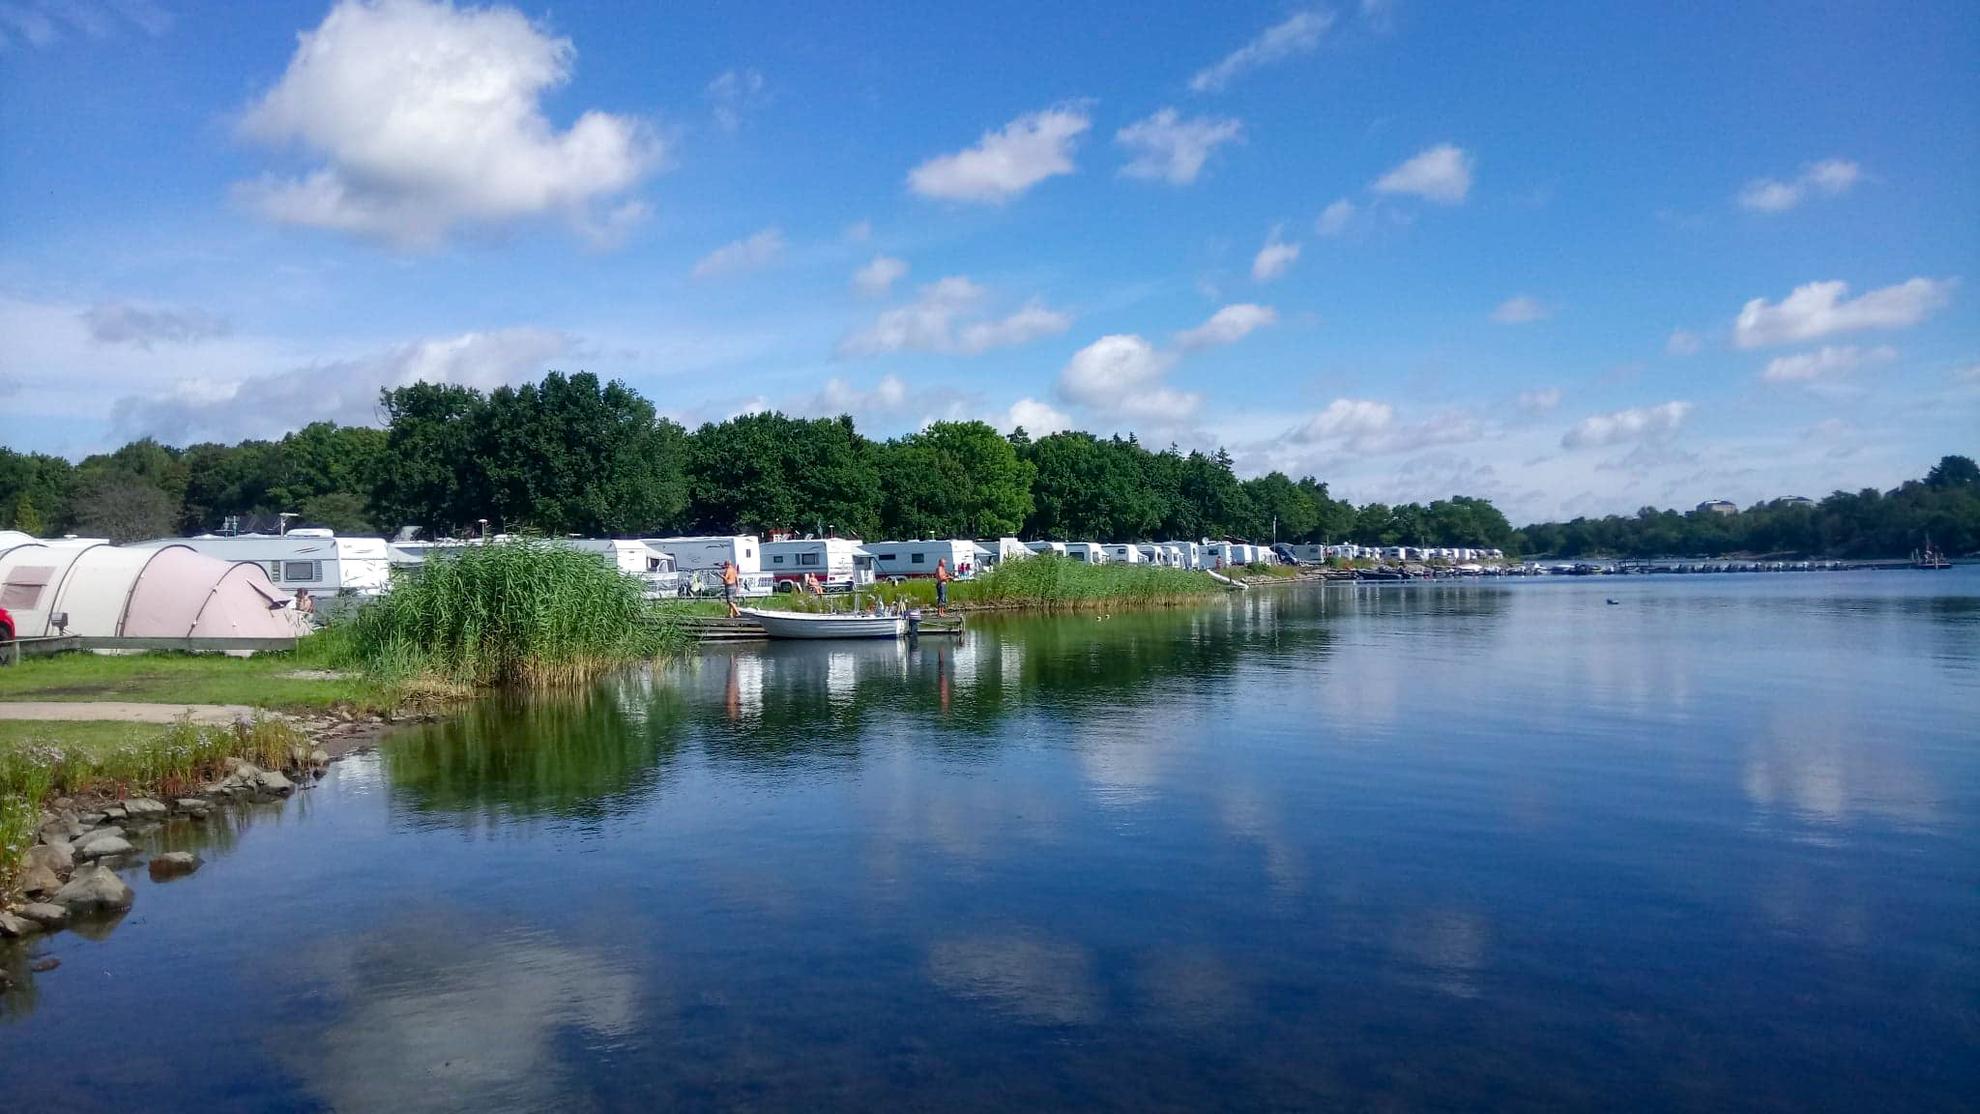 Caravans and tents are in a row next to the water at Dragsö Camping.